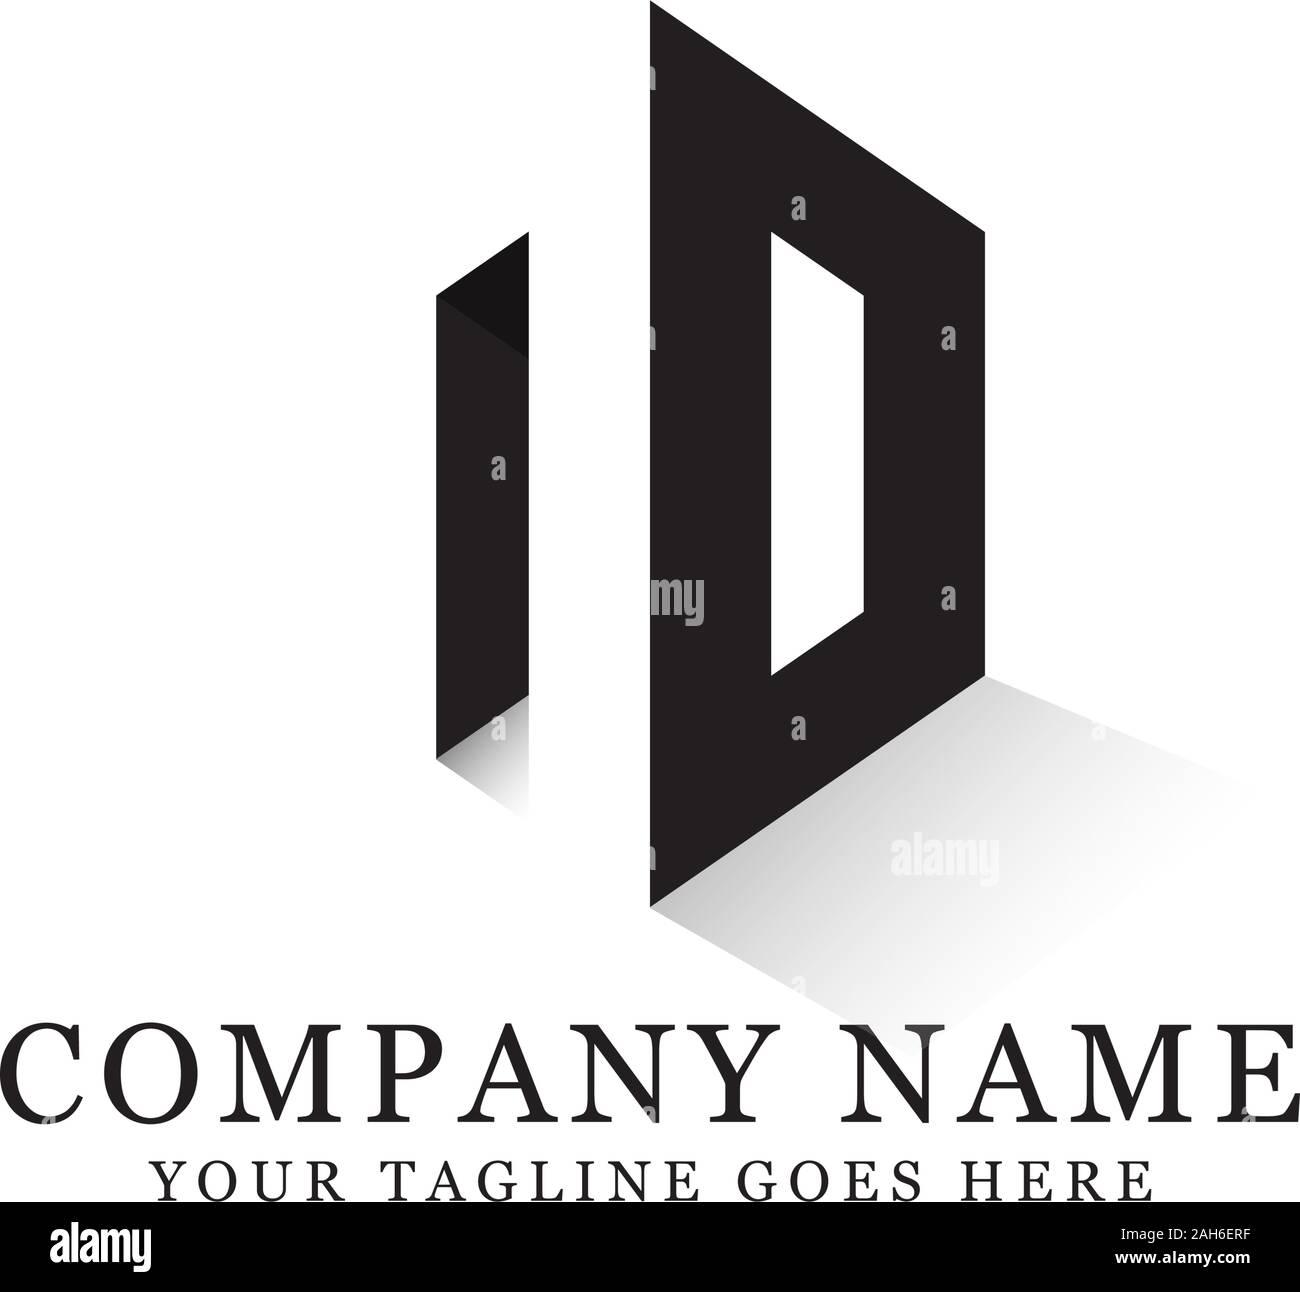 ND initial logo inspiration, negative space letter logo designs Stock Vector